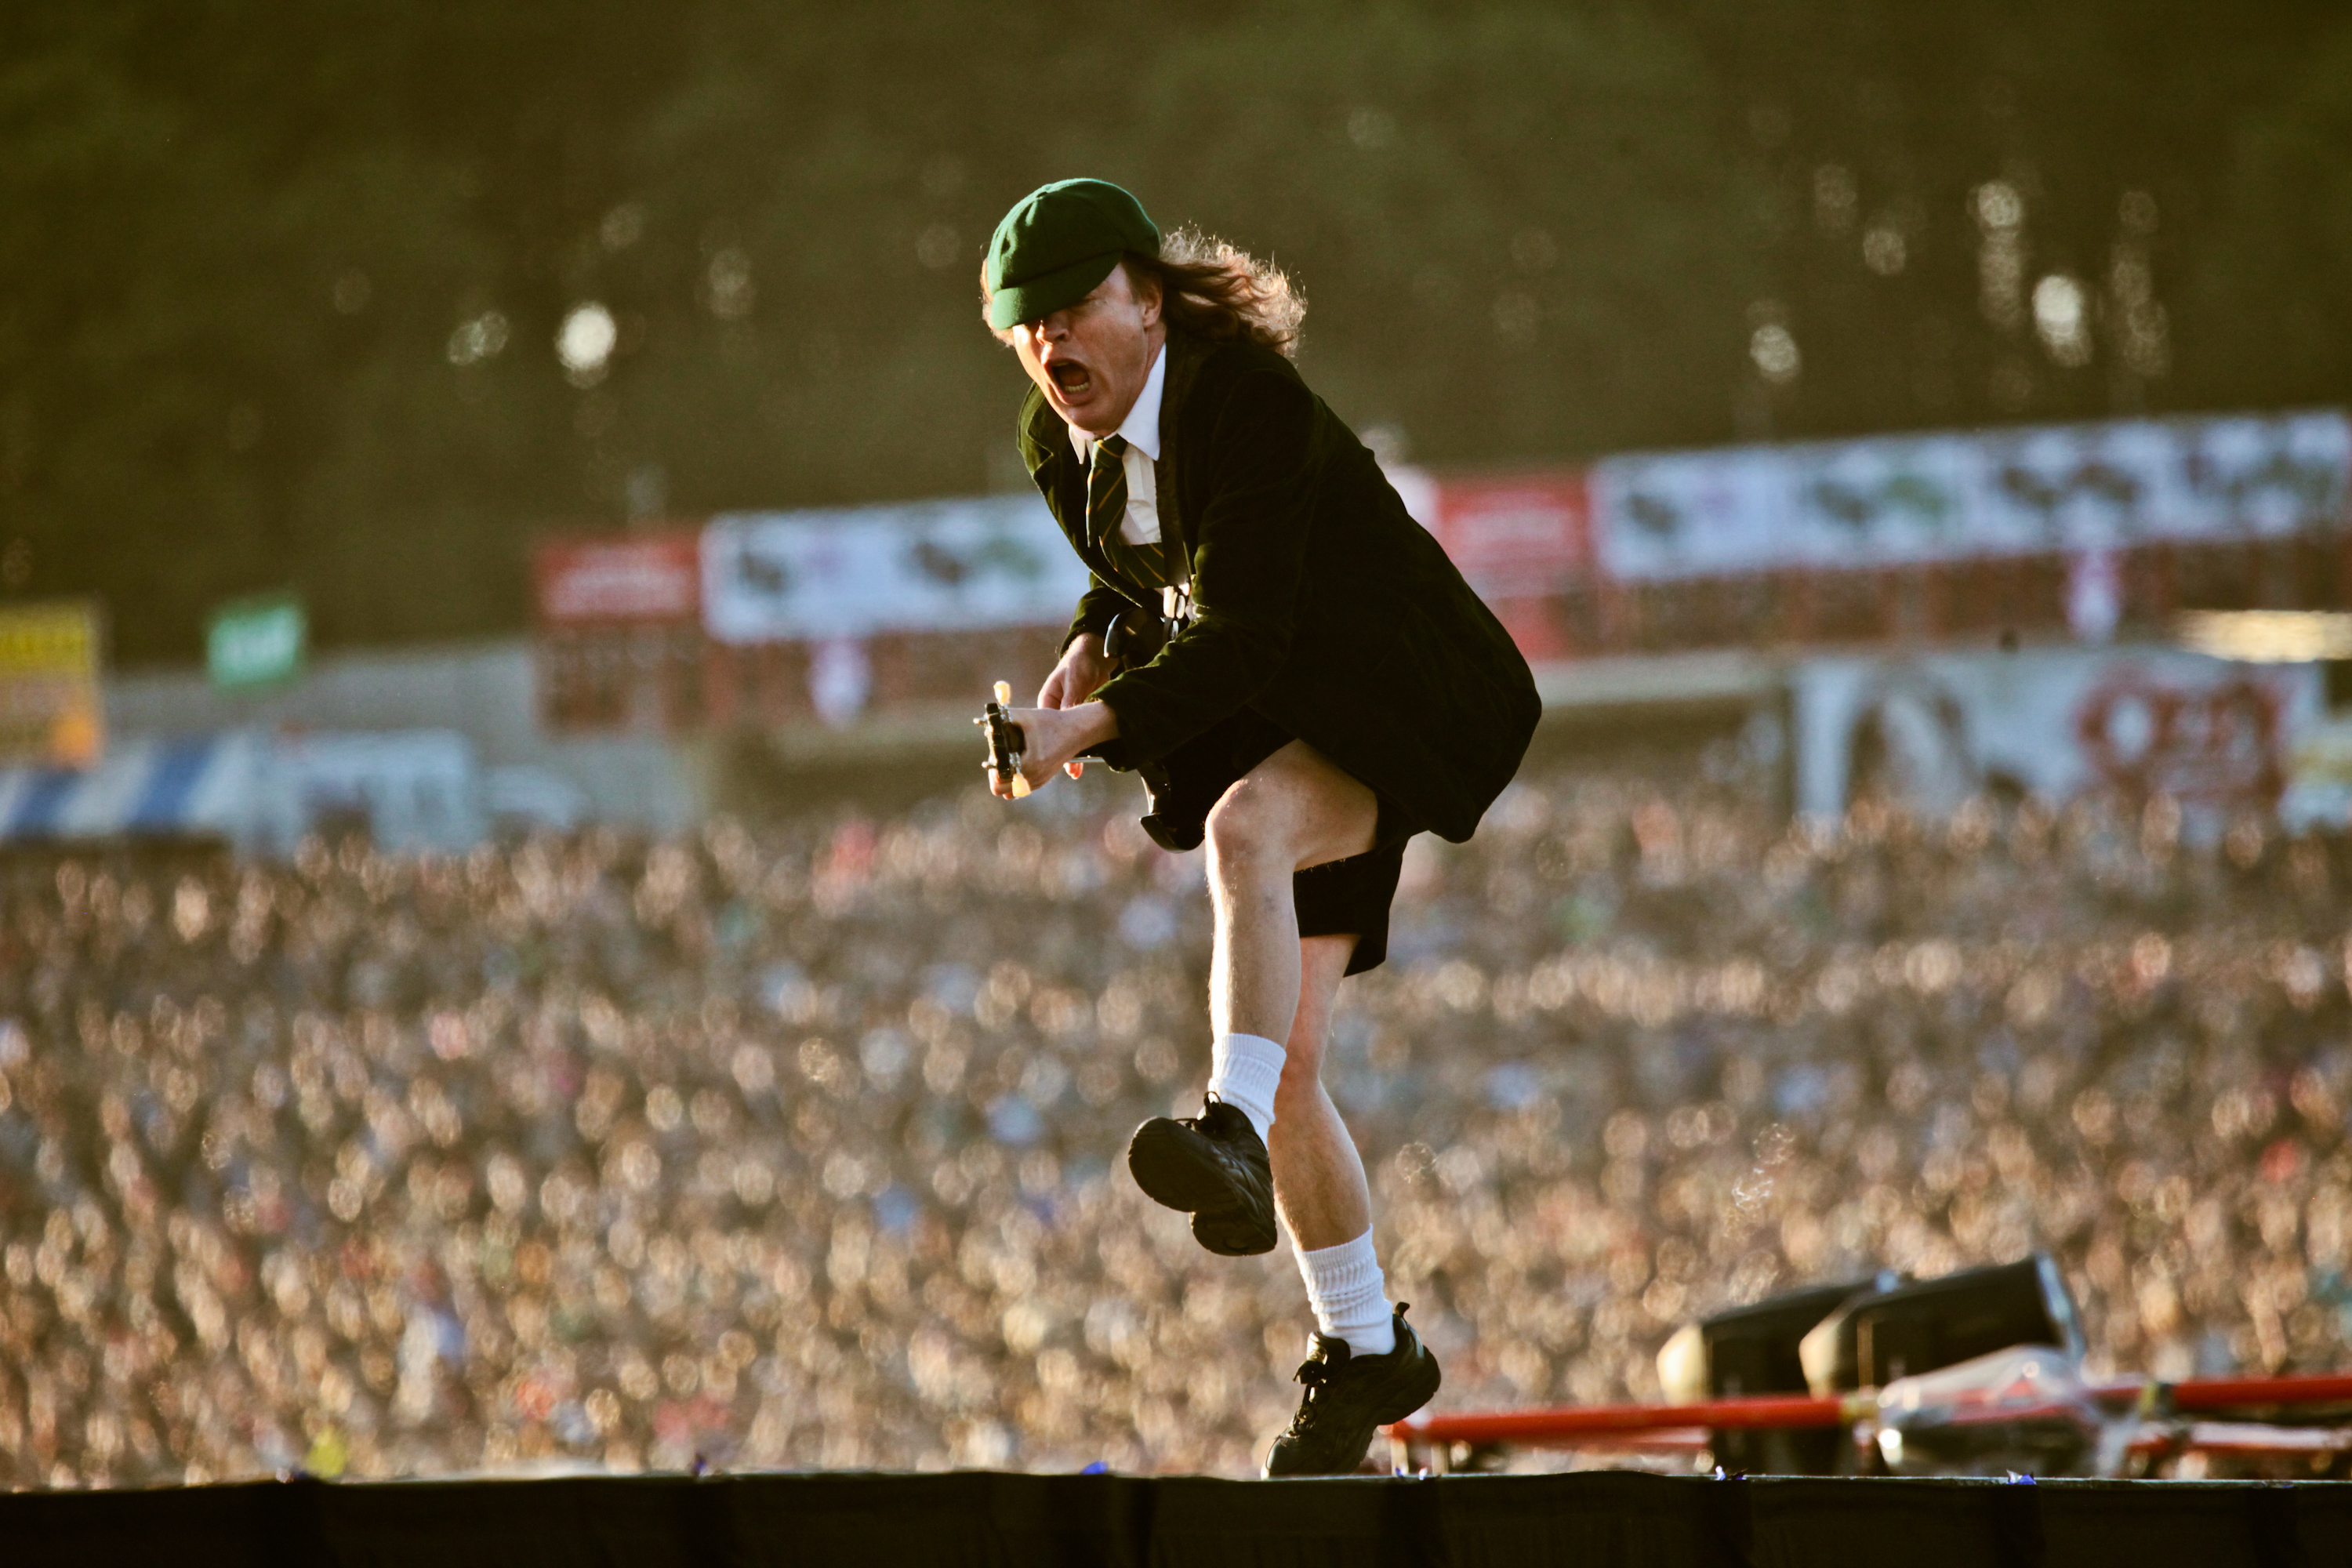 DONINGTON, UK - JUNE 11: A view from the stage showing the audience as Angus Young of AC/DC performs on stage at Download Fes